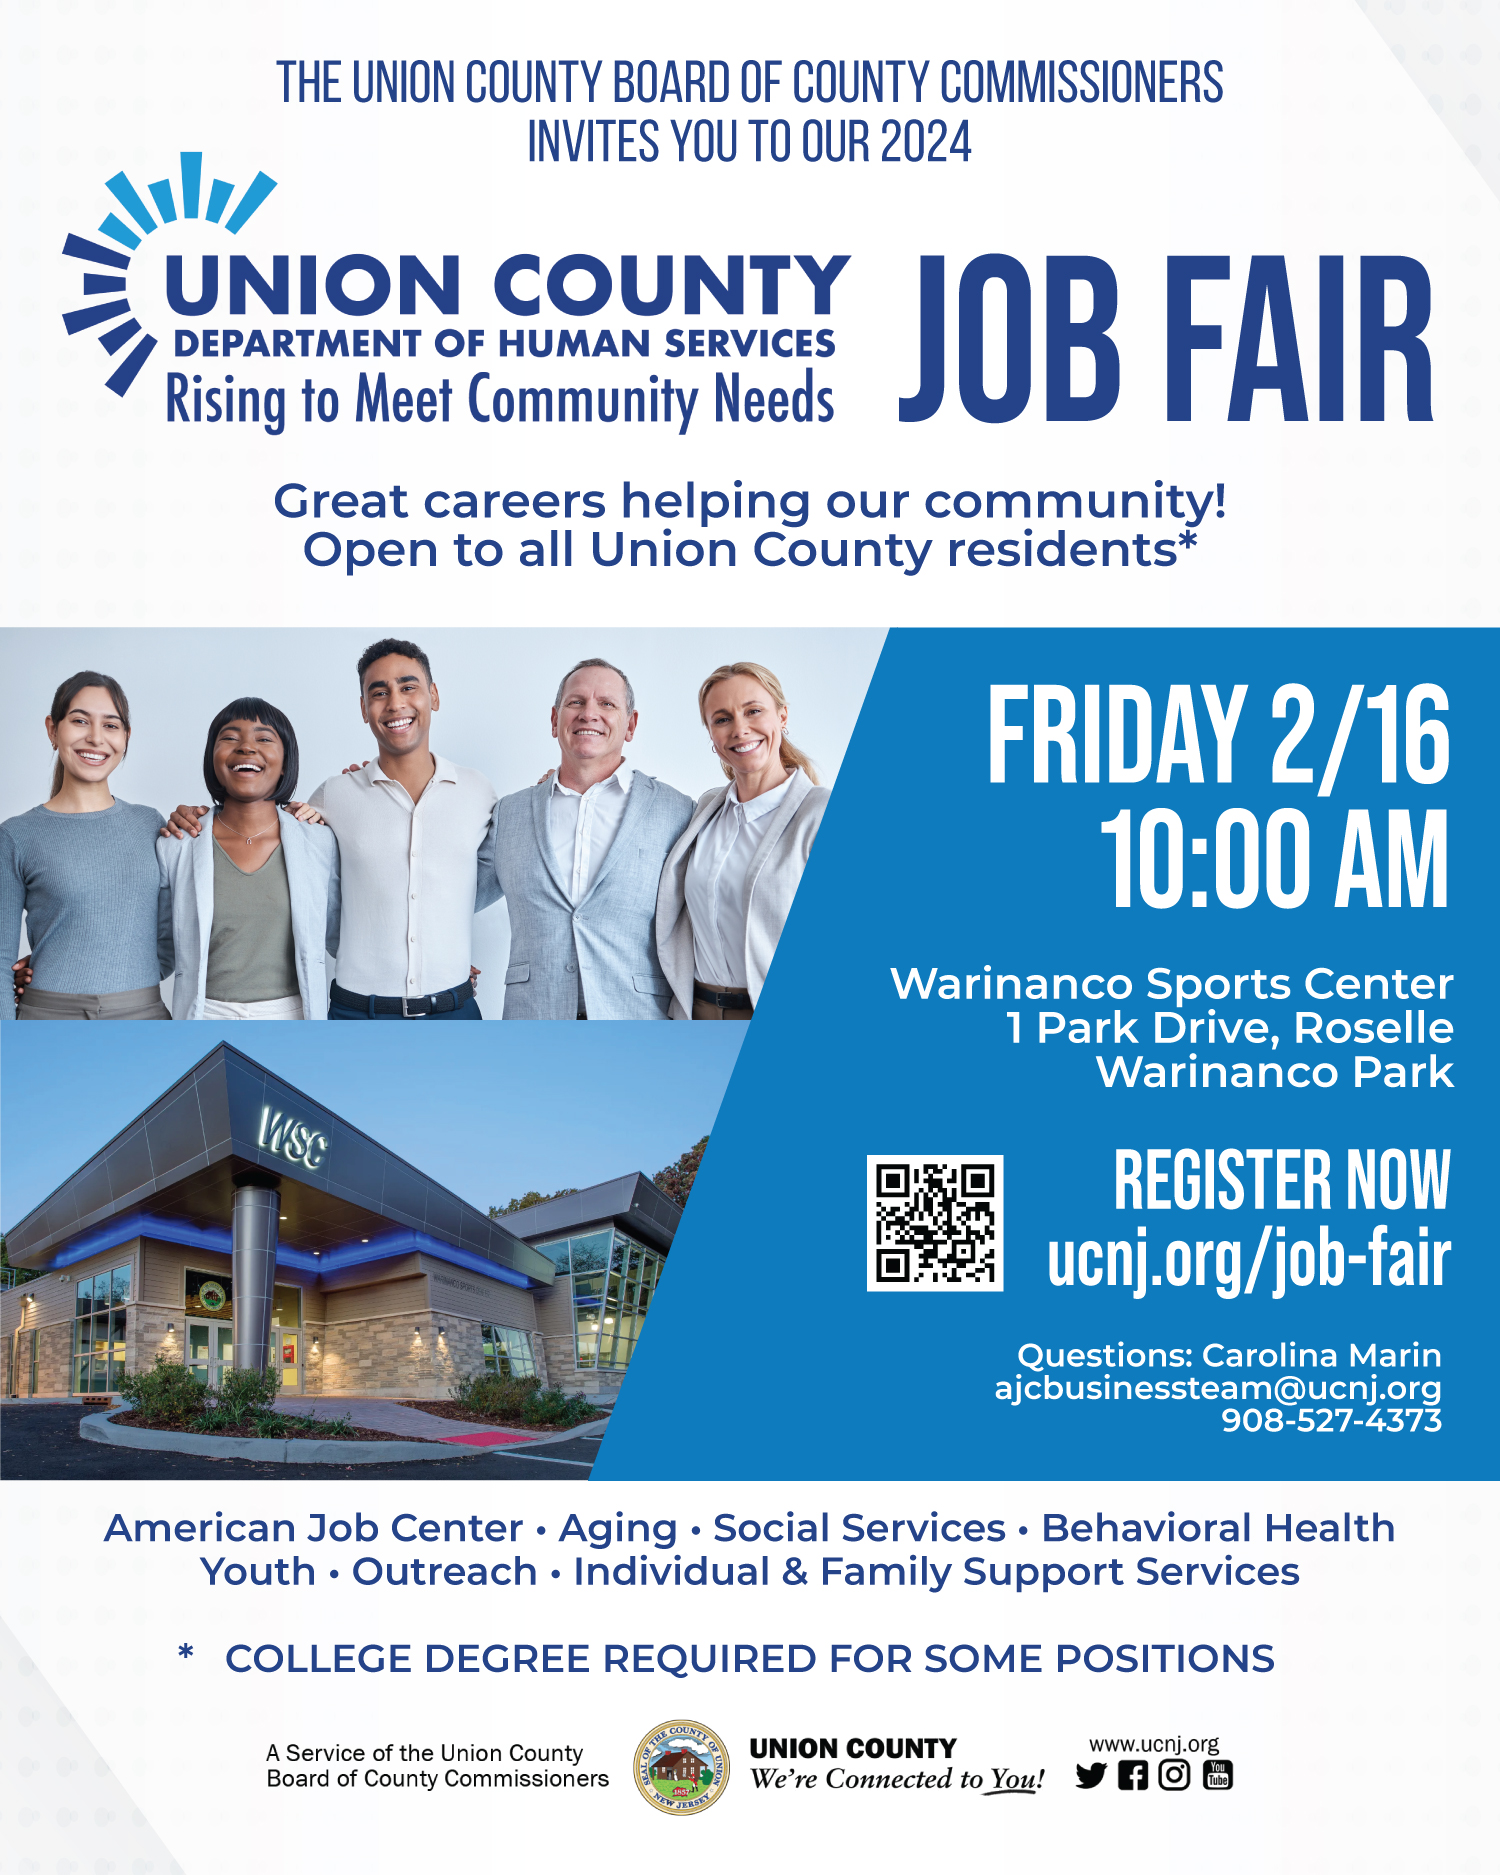 Union County to host Exclusive Job Fair for Careers within the Department of Human Services